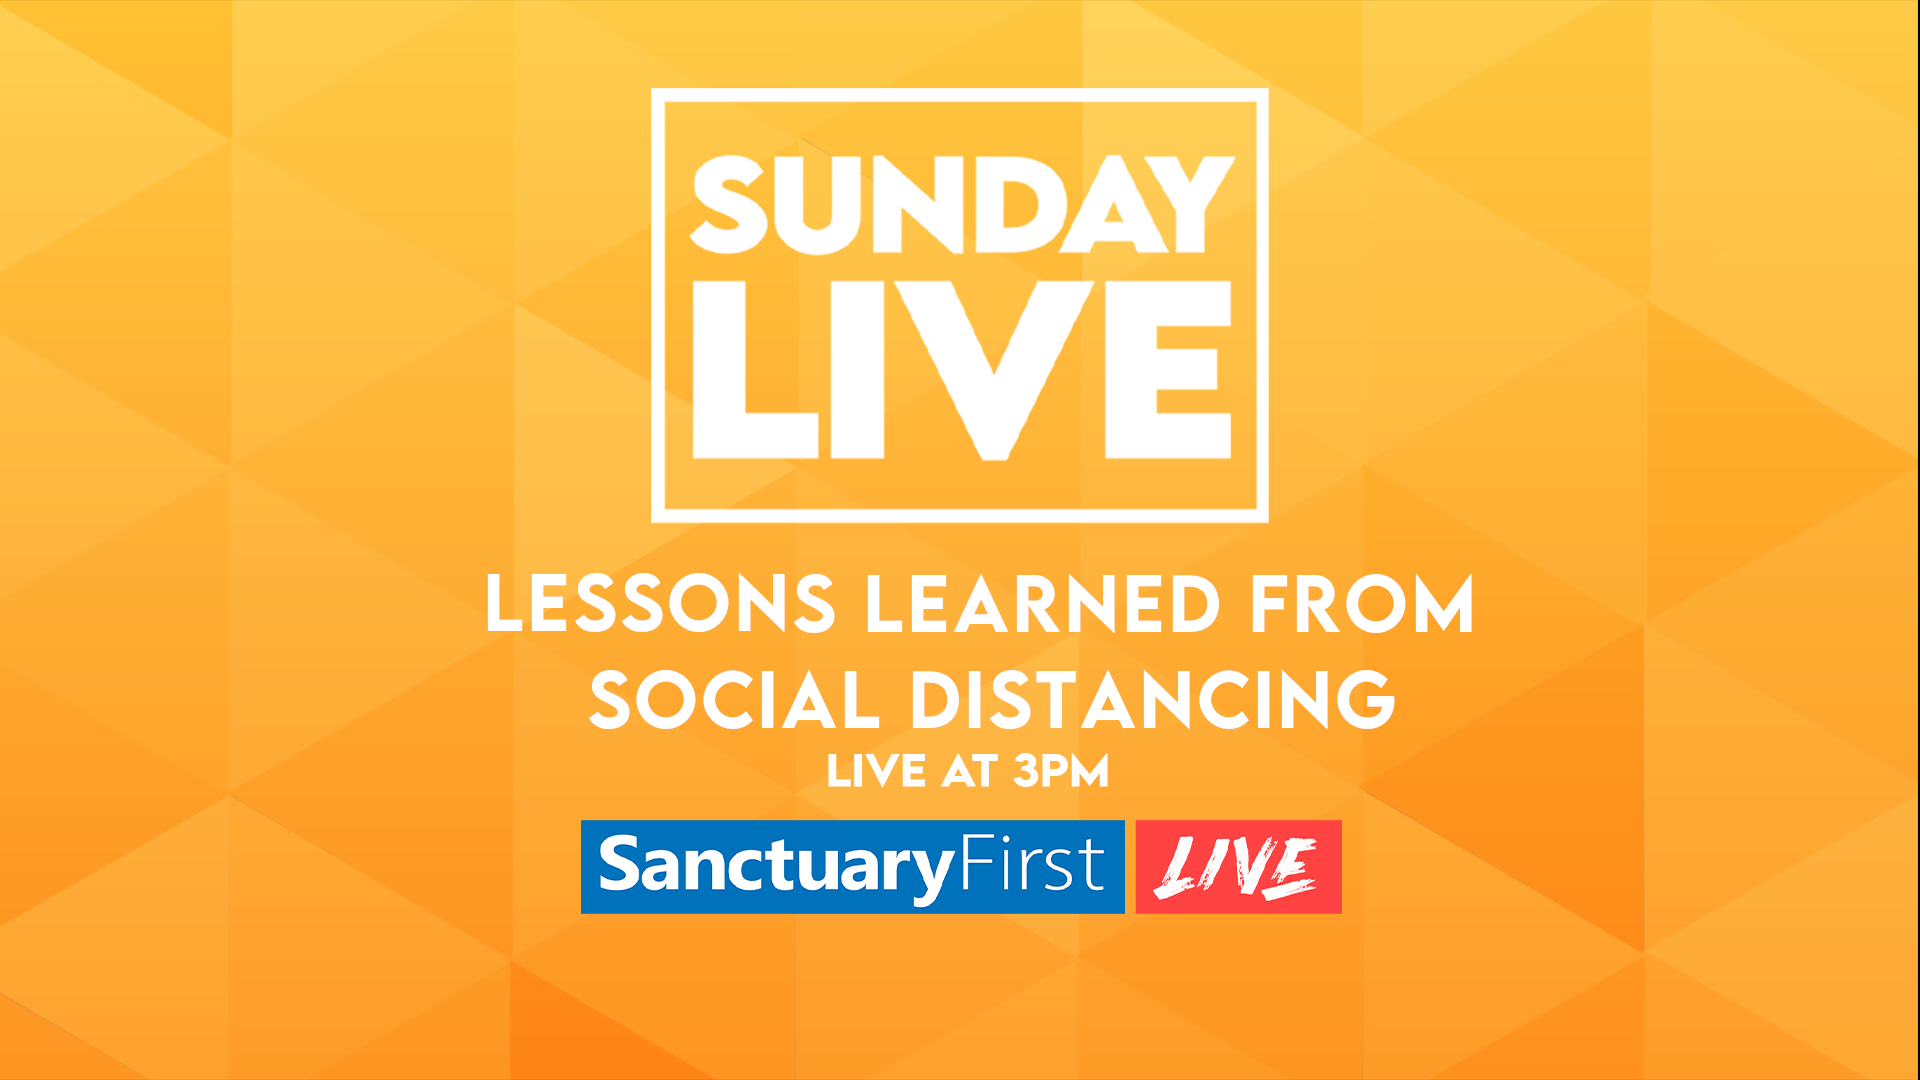 Sunday Live - Lessons learned from social distancing